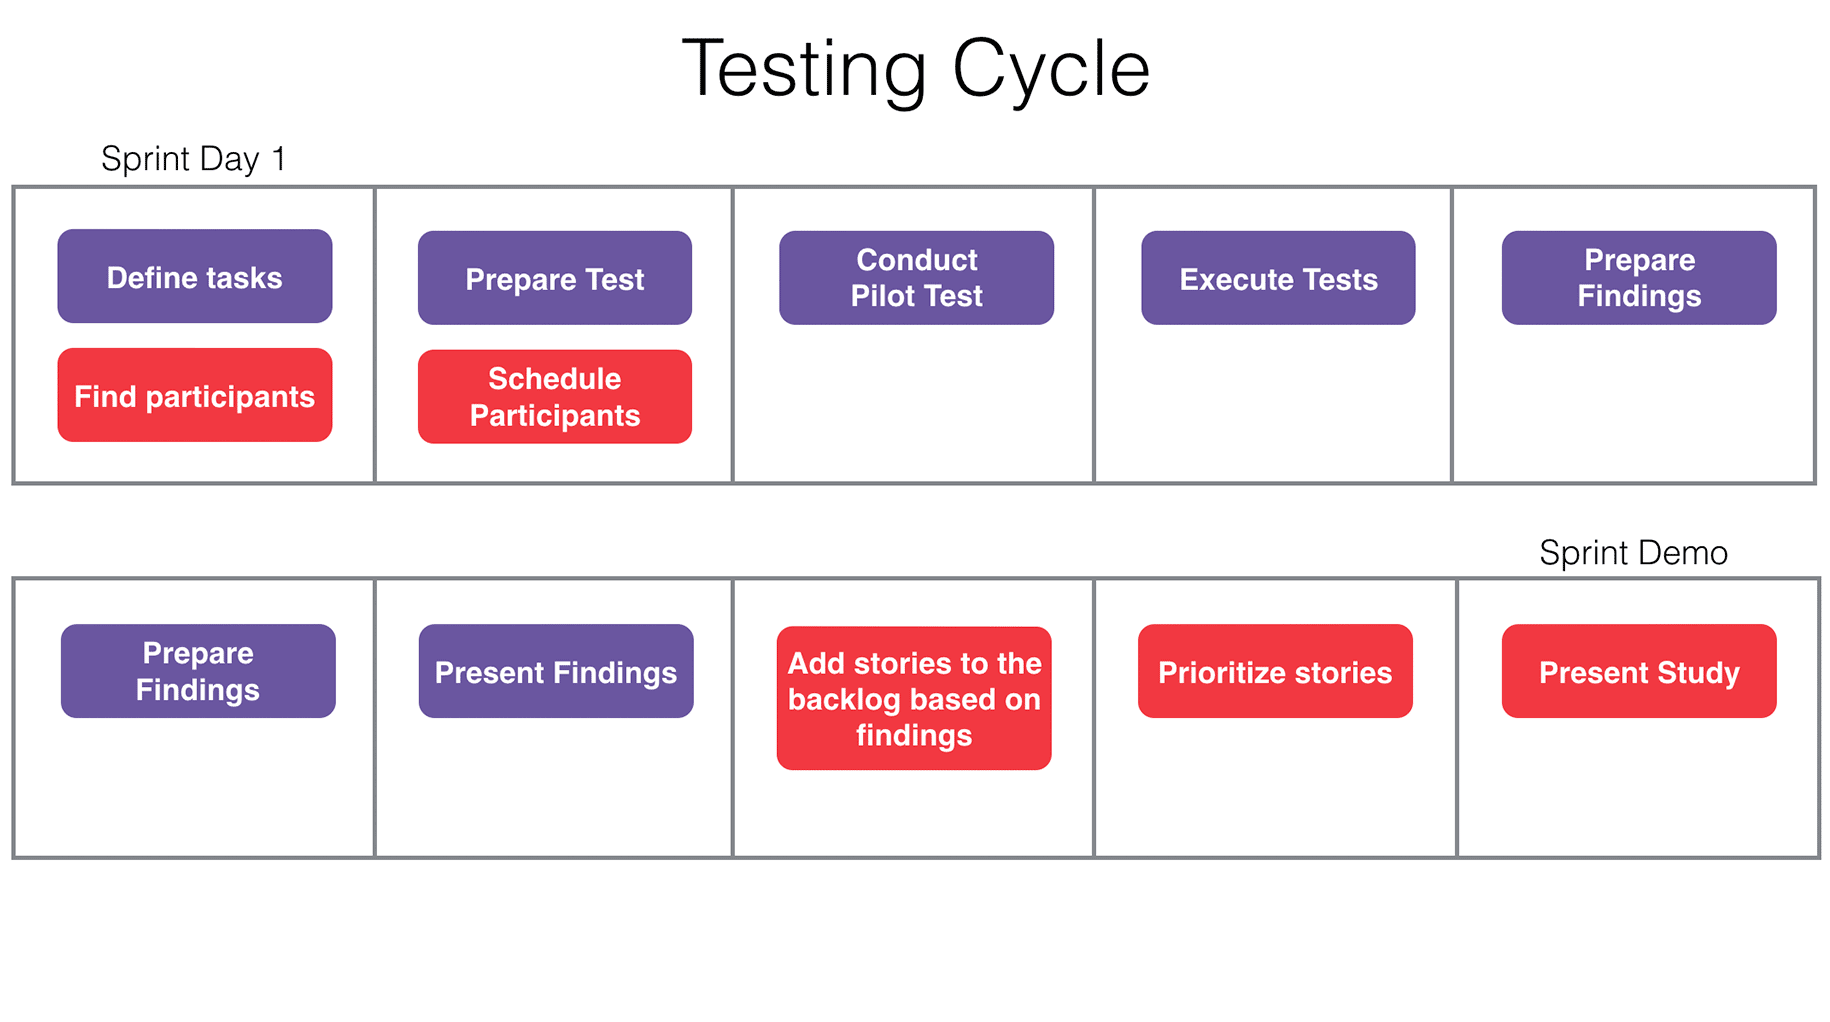 A two-week testing cycle with testing in week one and presentation of findings in week two